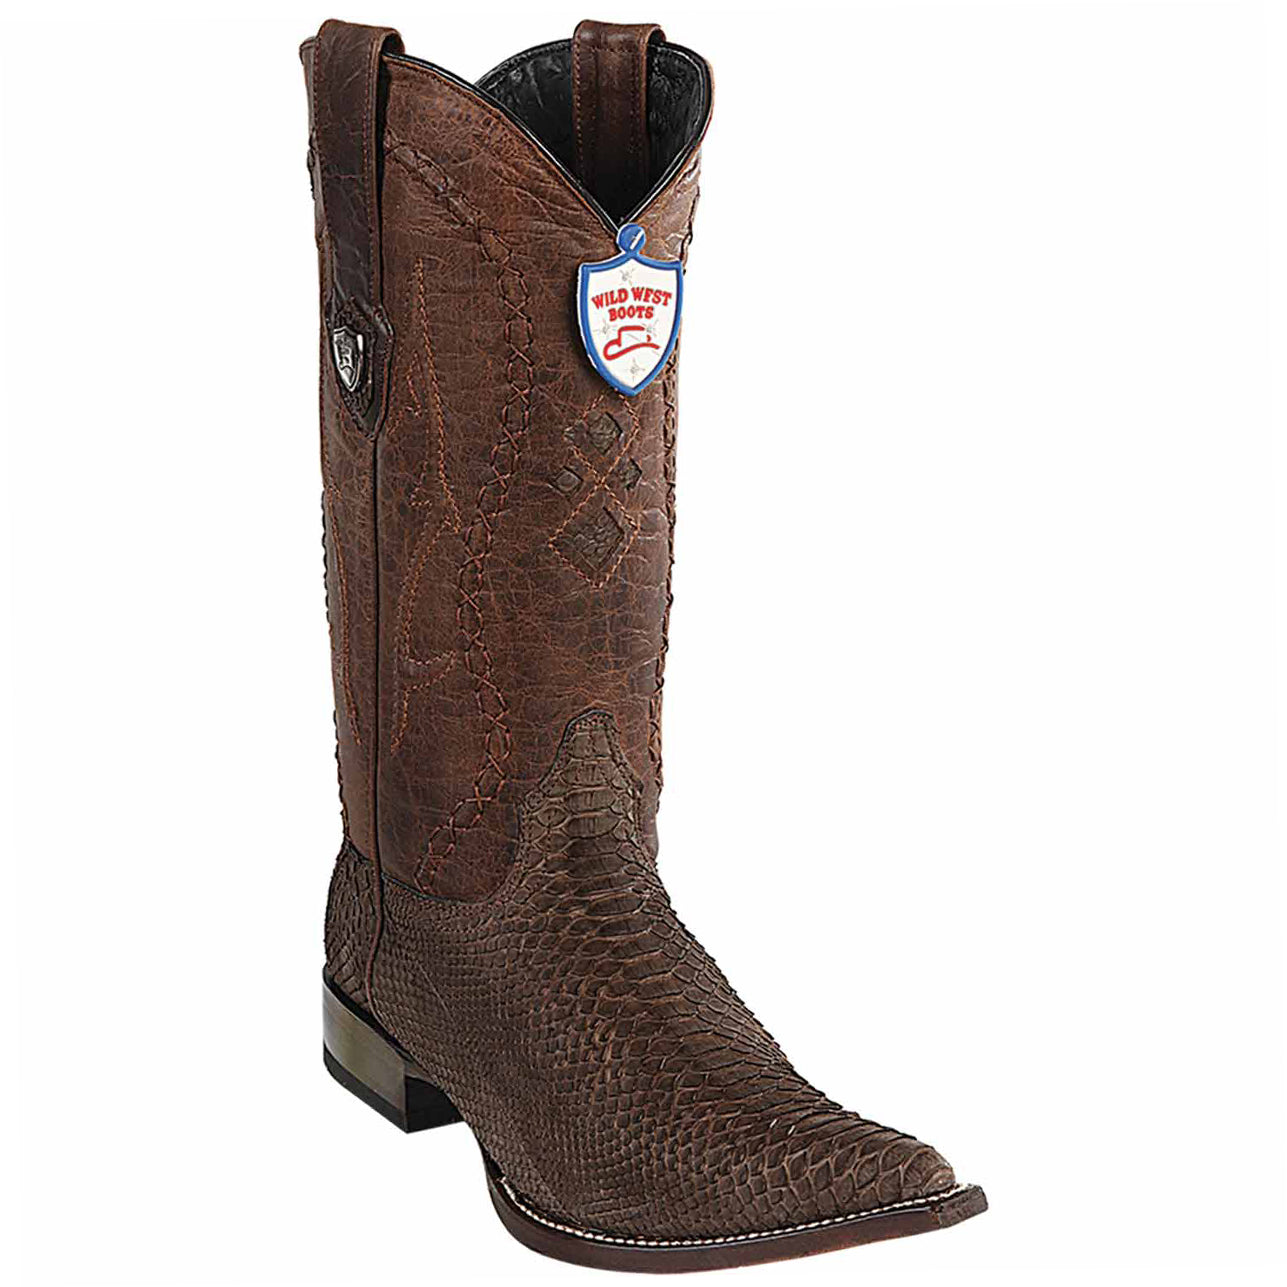 Brown Natural Python Snakeskin Cowboy Boots - Pointy Toe